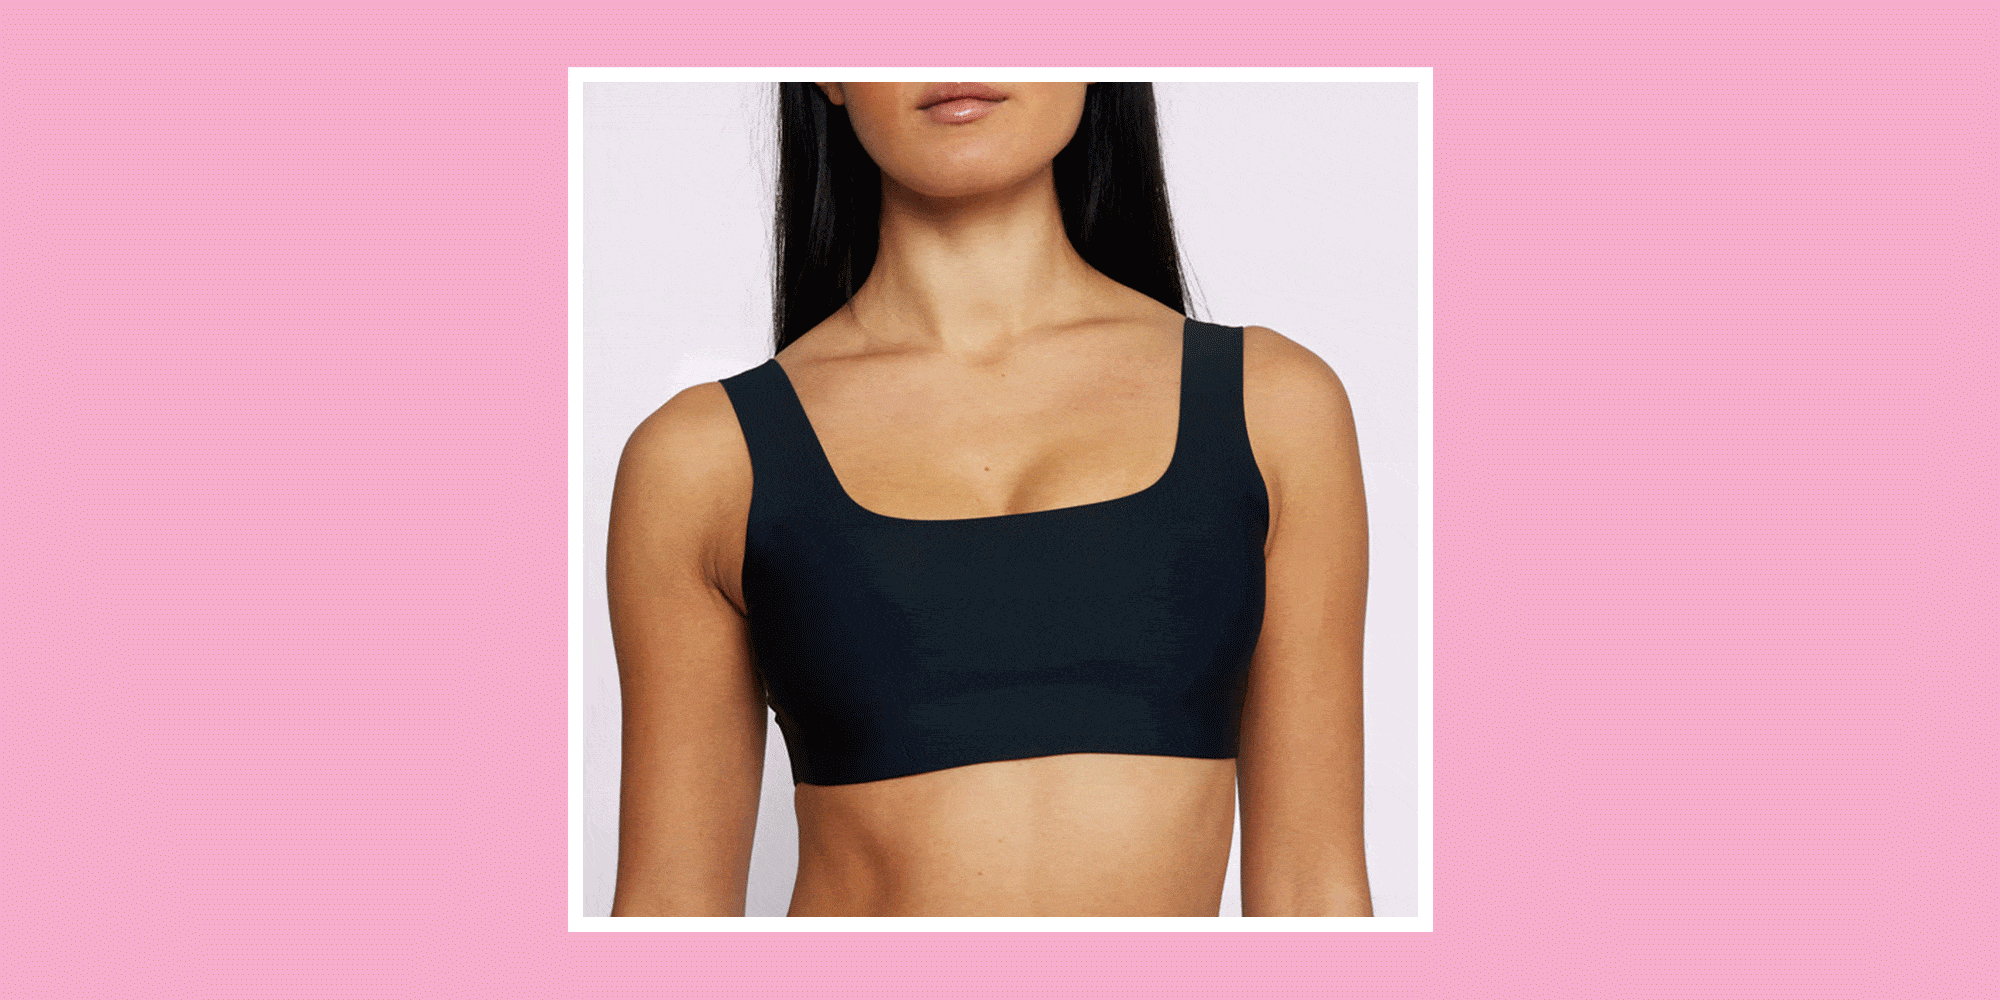 via GIPHY  Clothes pictures, Giphy, Sports bra